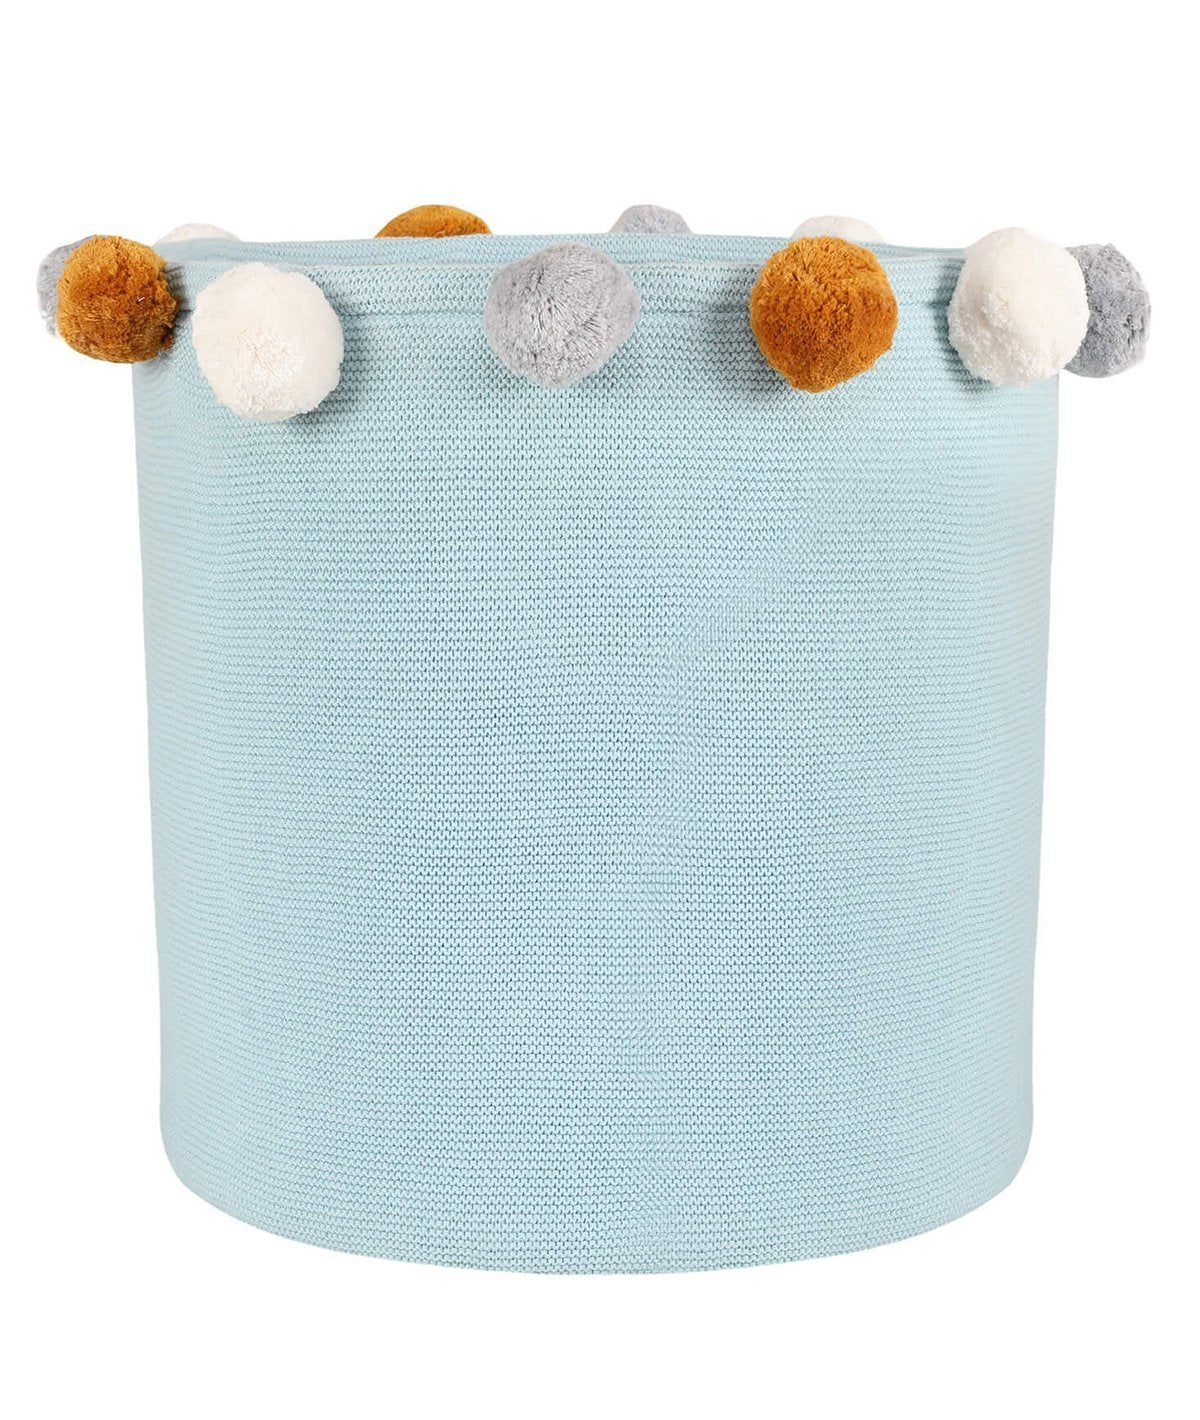 Doggy Buddy Baby Blue Cotton Knitted Storage Basket with Pompoms for Kids Room / Nursery Decor